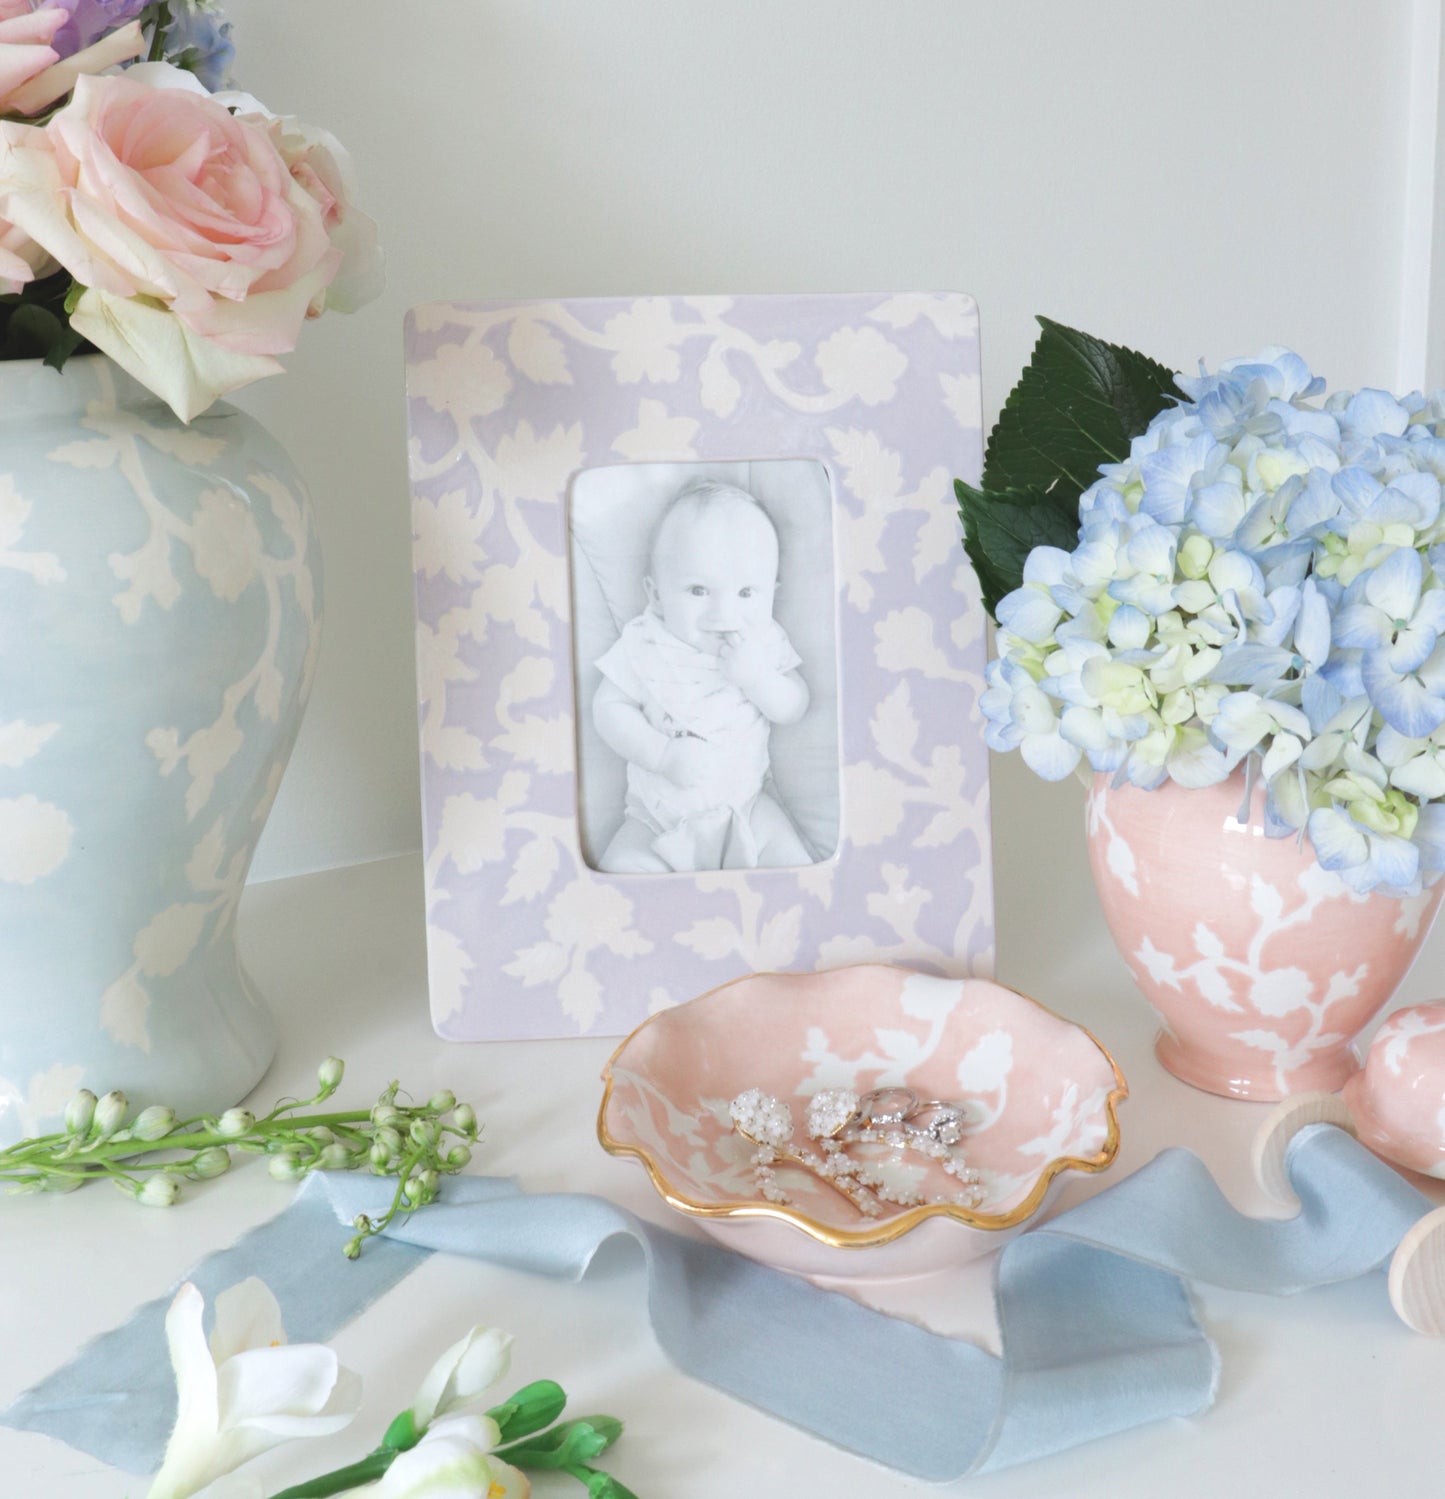 Chinoiserie Dreams Photo Frame | Wholesale